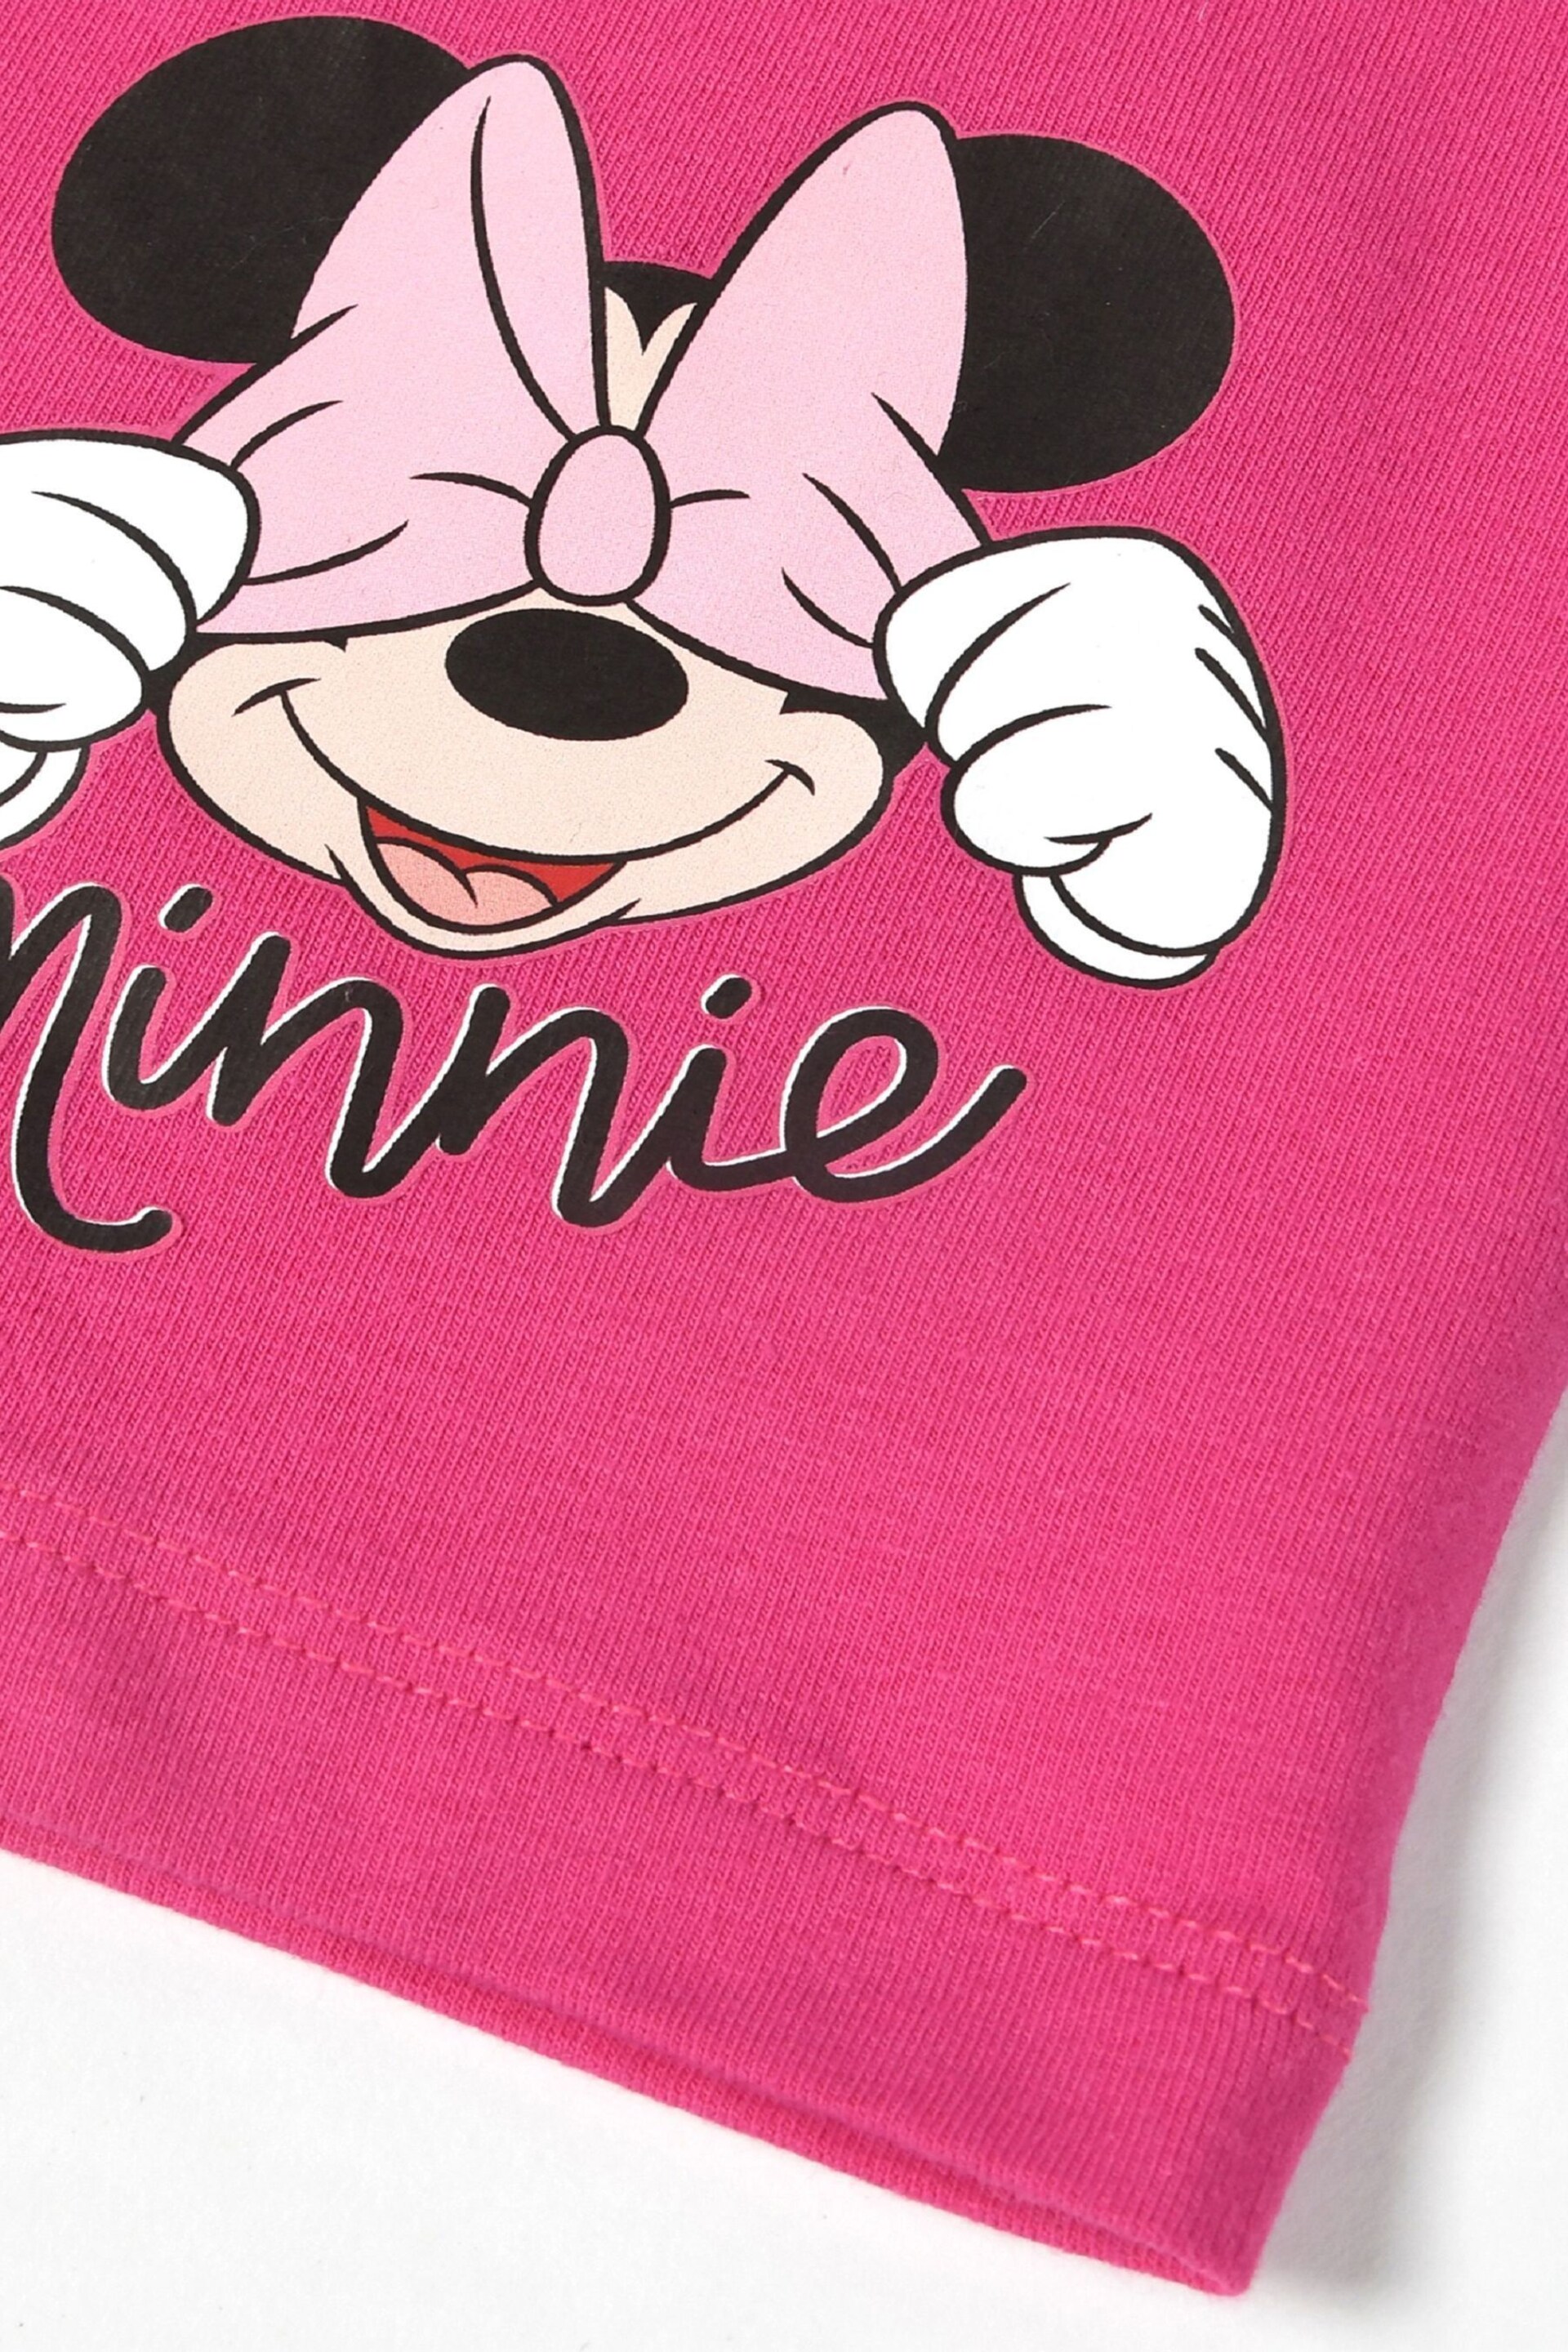 Brand Threads Pink Disney Minnie Mouse BoysT-Shirt and Shorts Set - Image 5 of 5